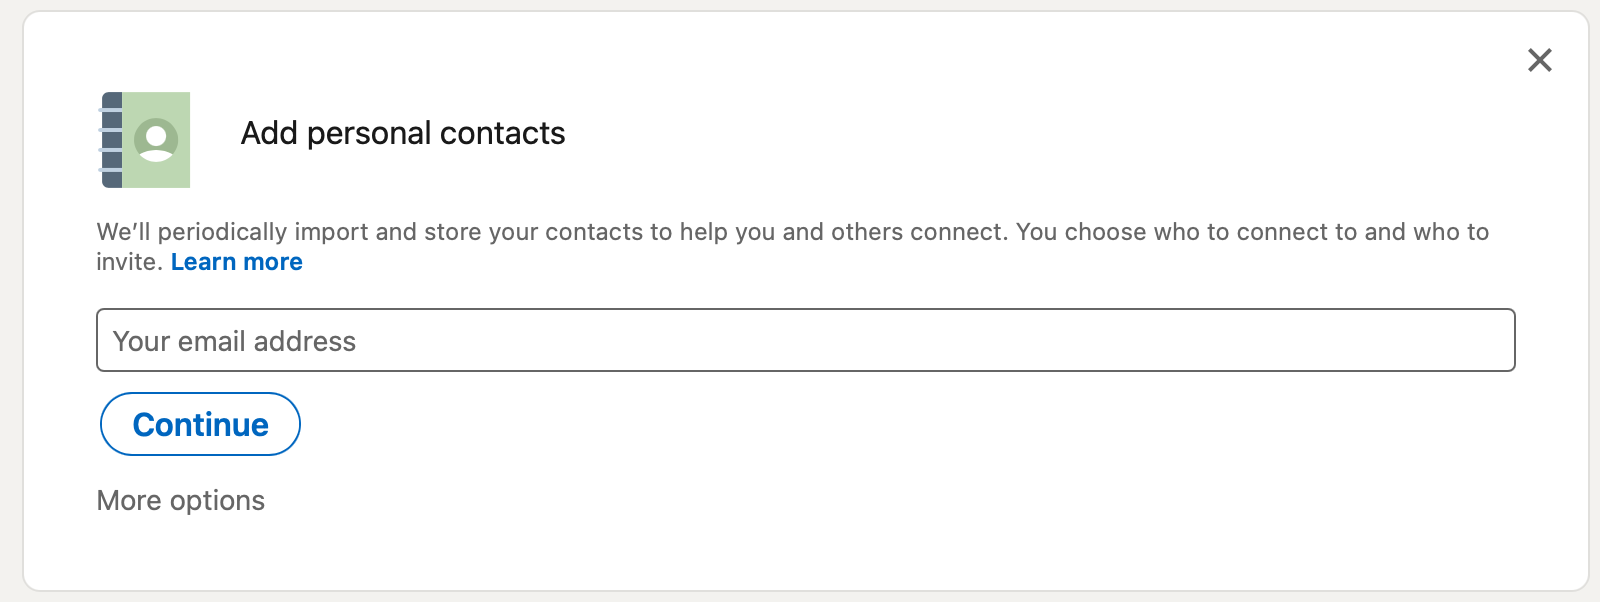 Add contacts to your network: Automatically add contacts on LinkedIn by uploading contacts from your email address.